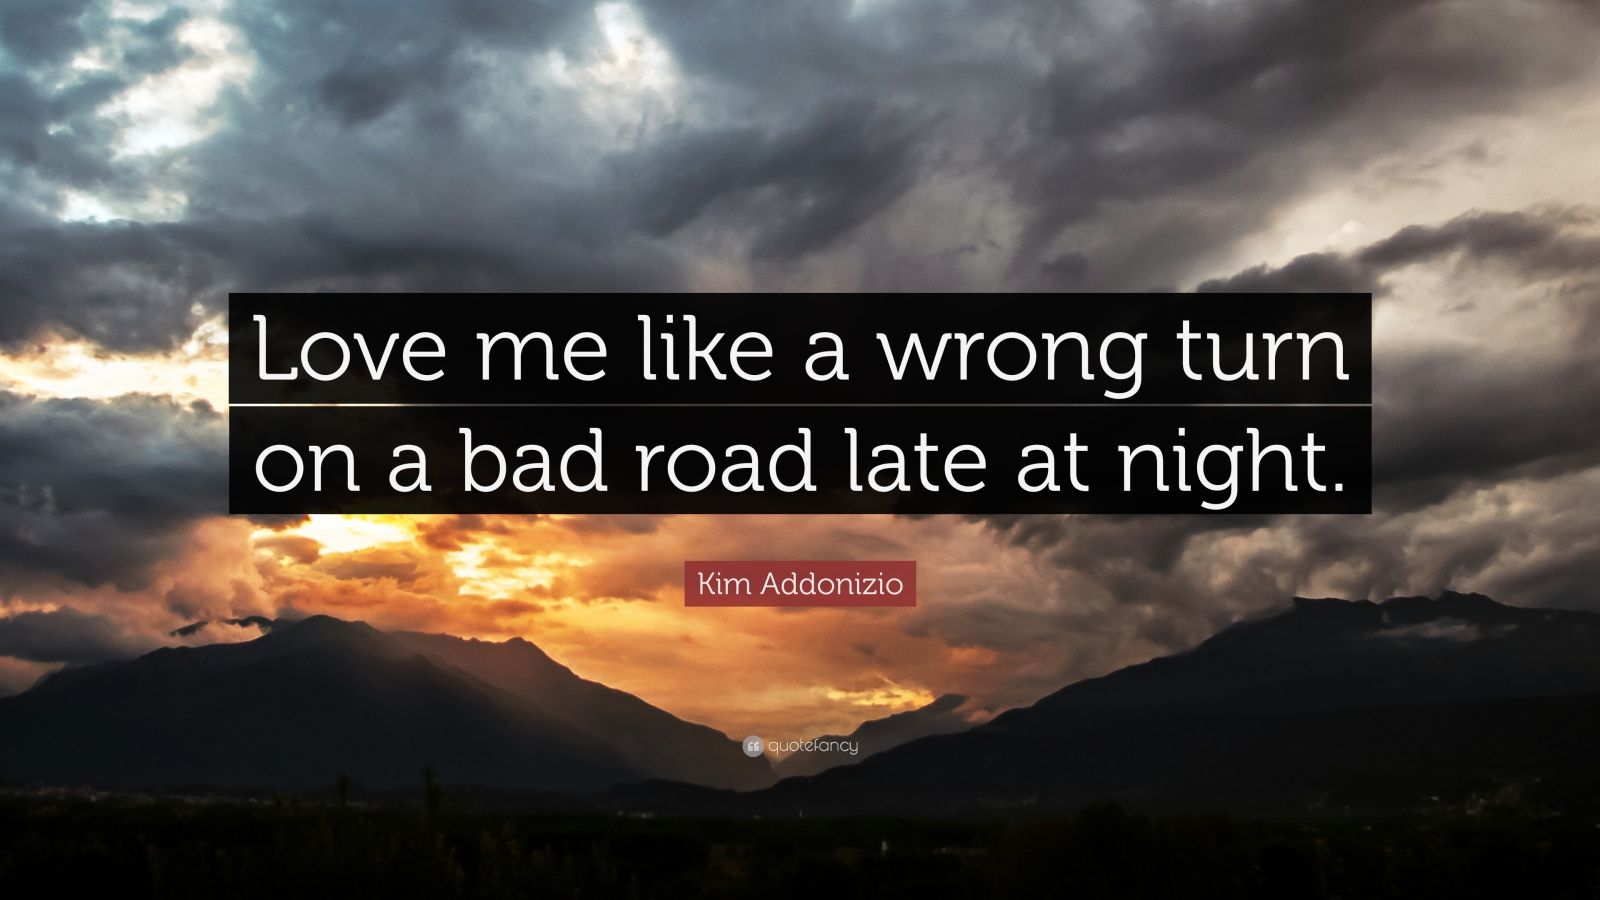 Kim Addonizio Quote: “Love me like a wrong turn on a bad road late at  night.”